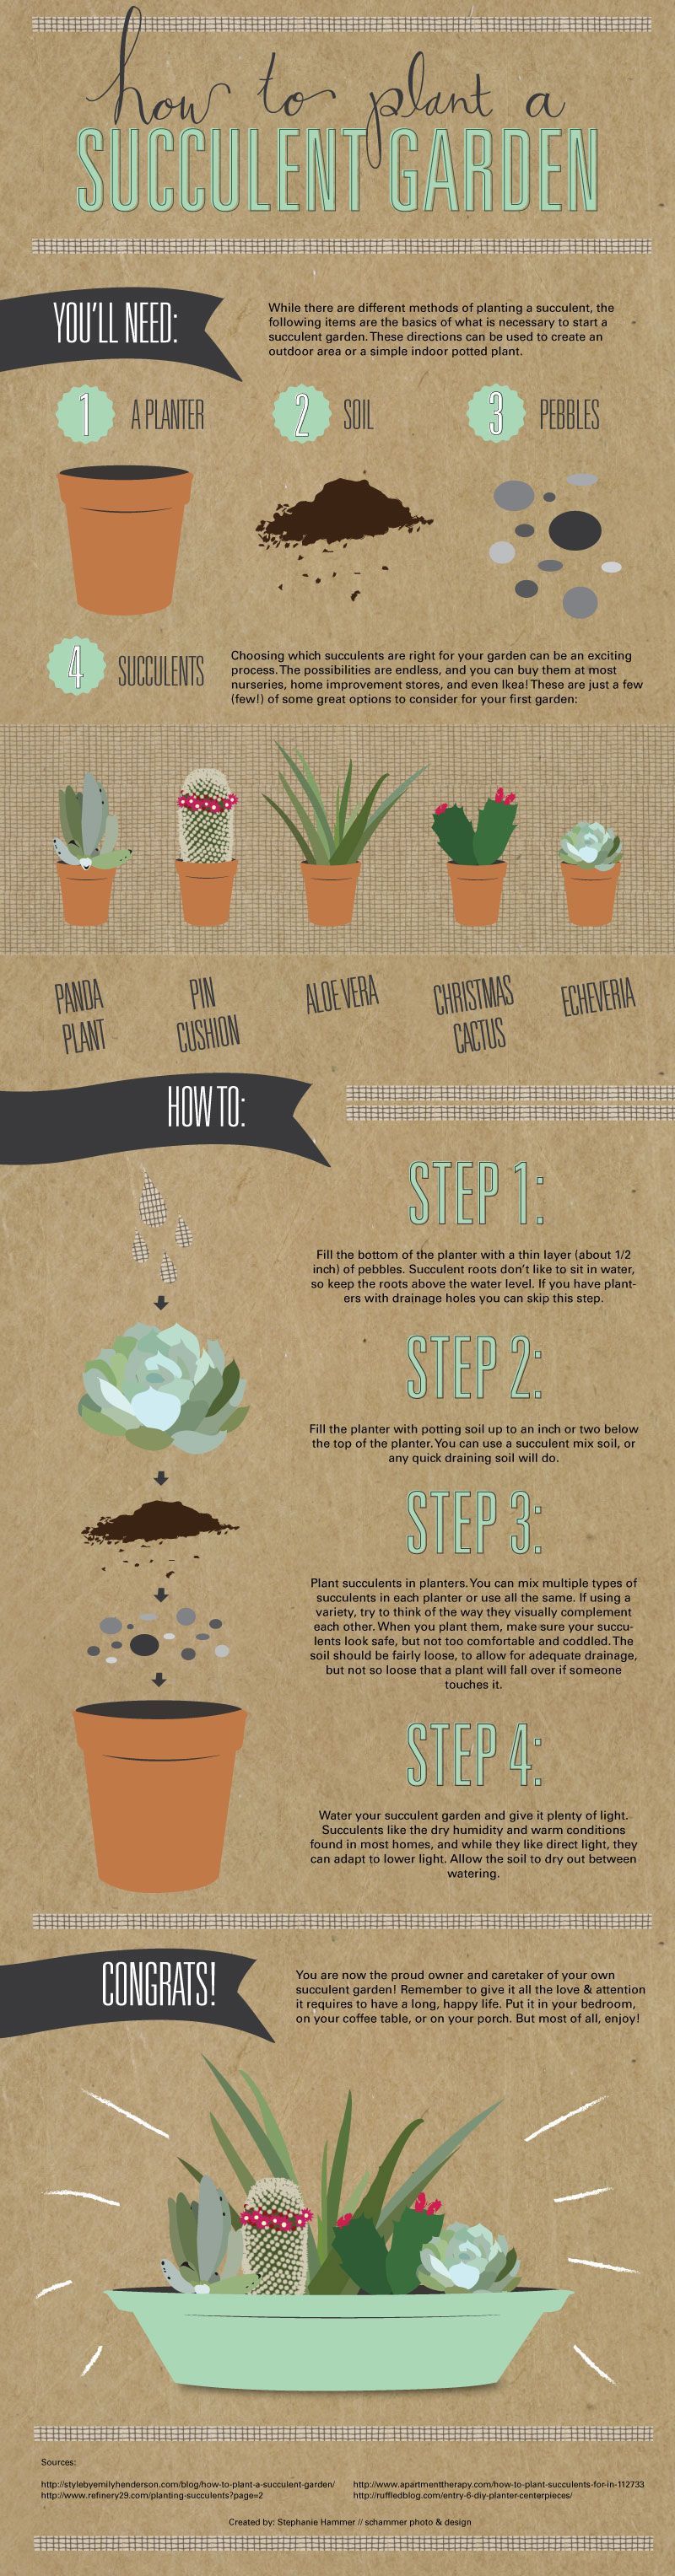 how to plant a succulent garden, the infographic @thesnugonline